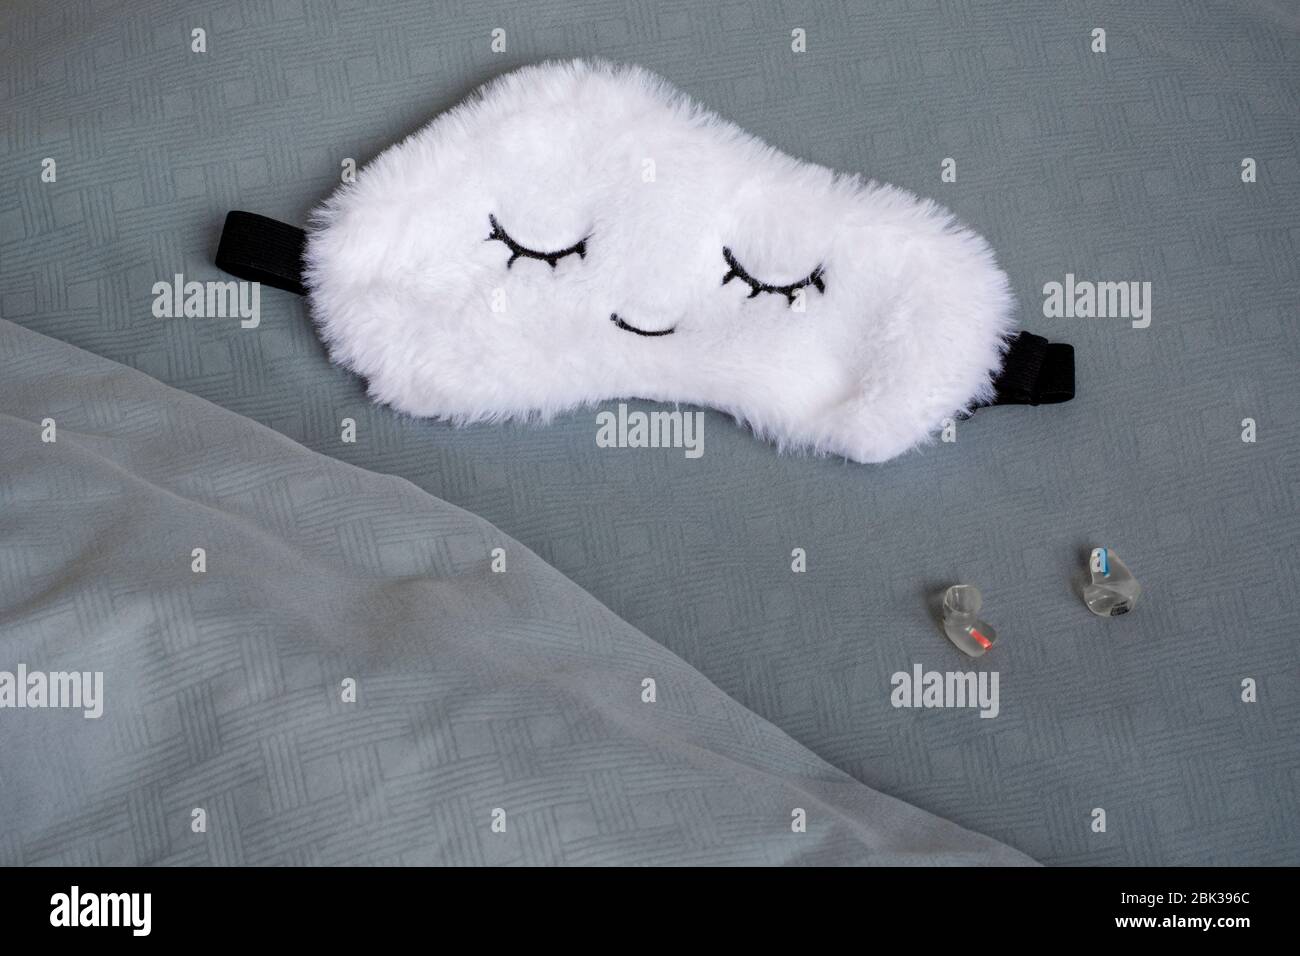 White cute sleep mask made of fluffy faux fur in a cloud shape with closed eyes embroidered on it and custom molded sleep ear plugs Stock Photo